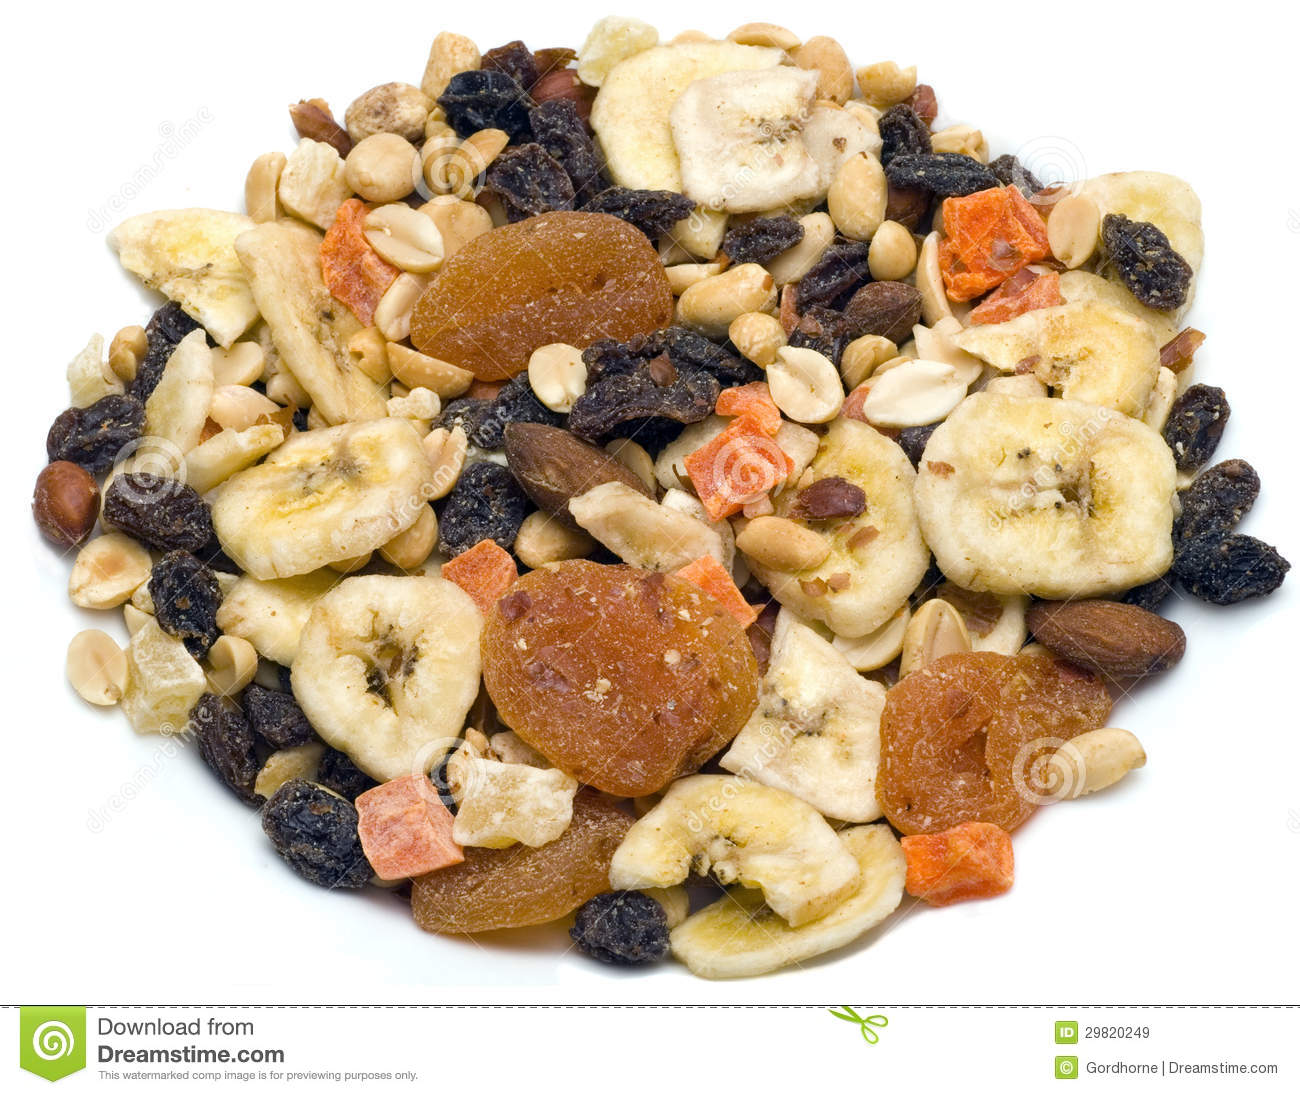 Trail Mix A Mix Of Dried Fruit Nuts And Other Healthy Foods